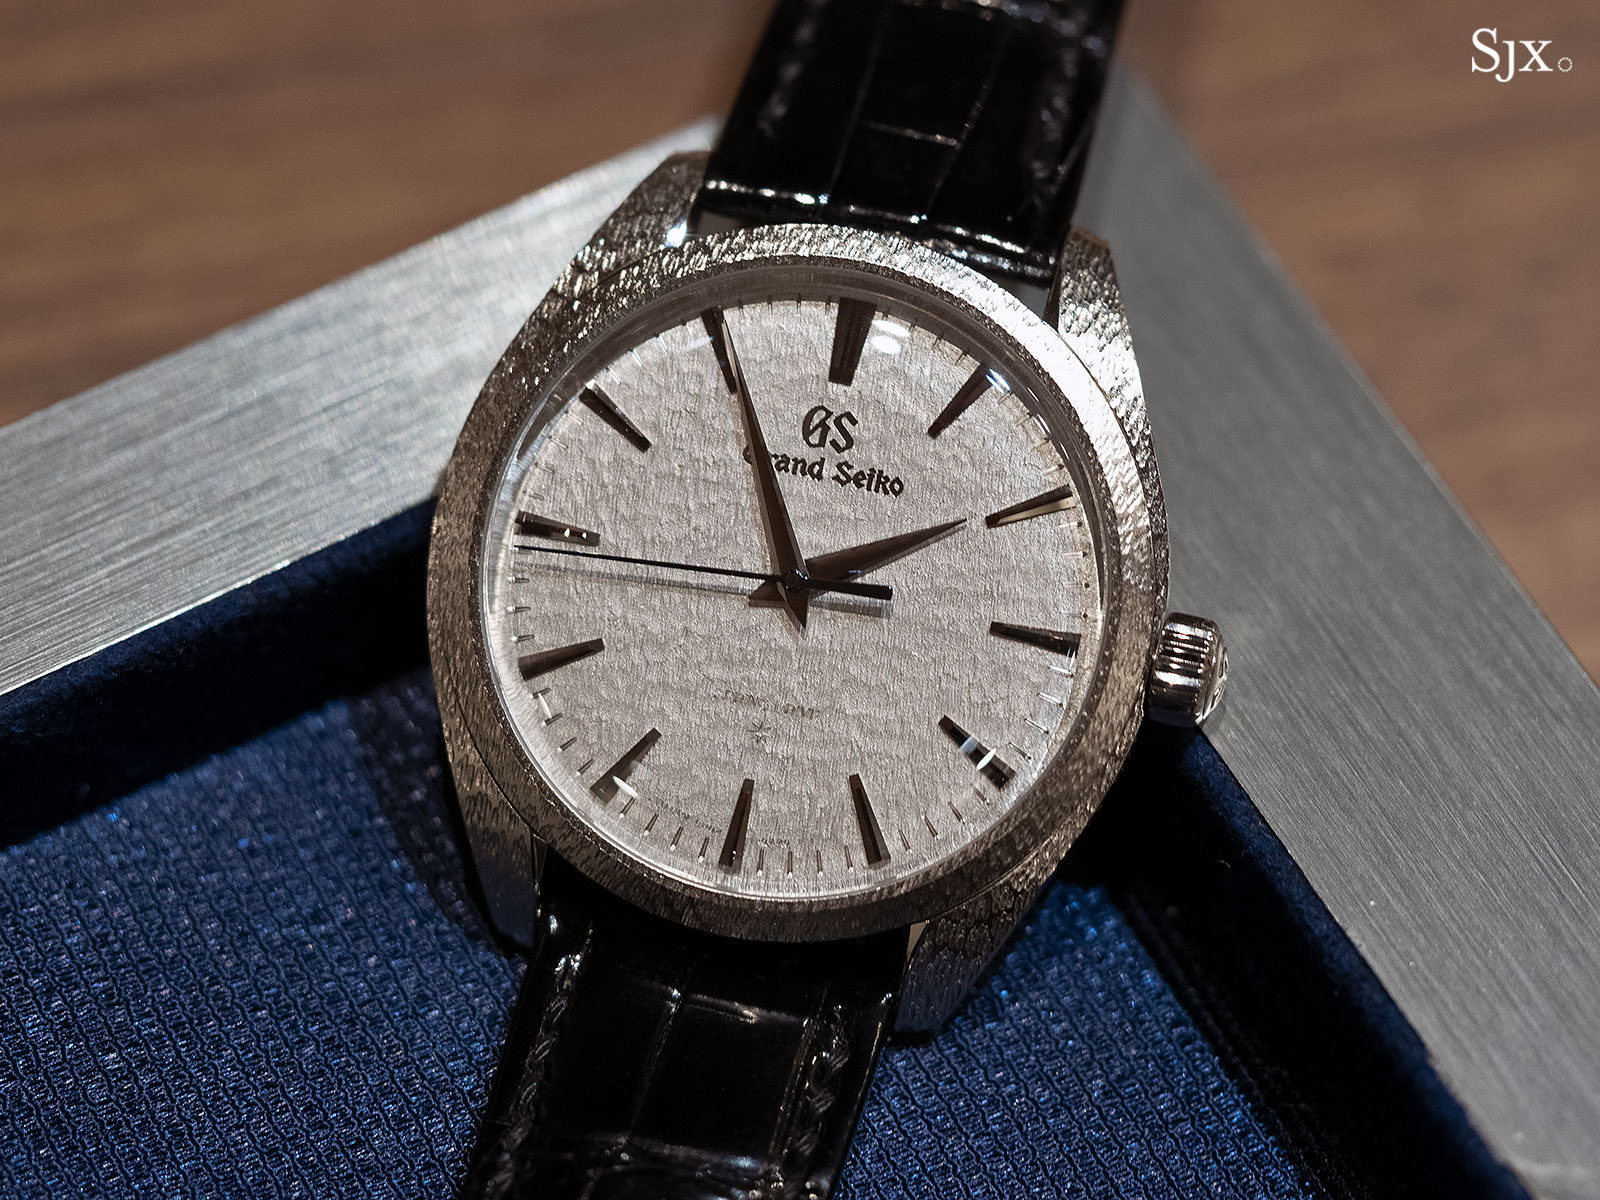 Why I Changed My Mind About the Grand Seiko Spring Drive 9R02 | SJX Watches